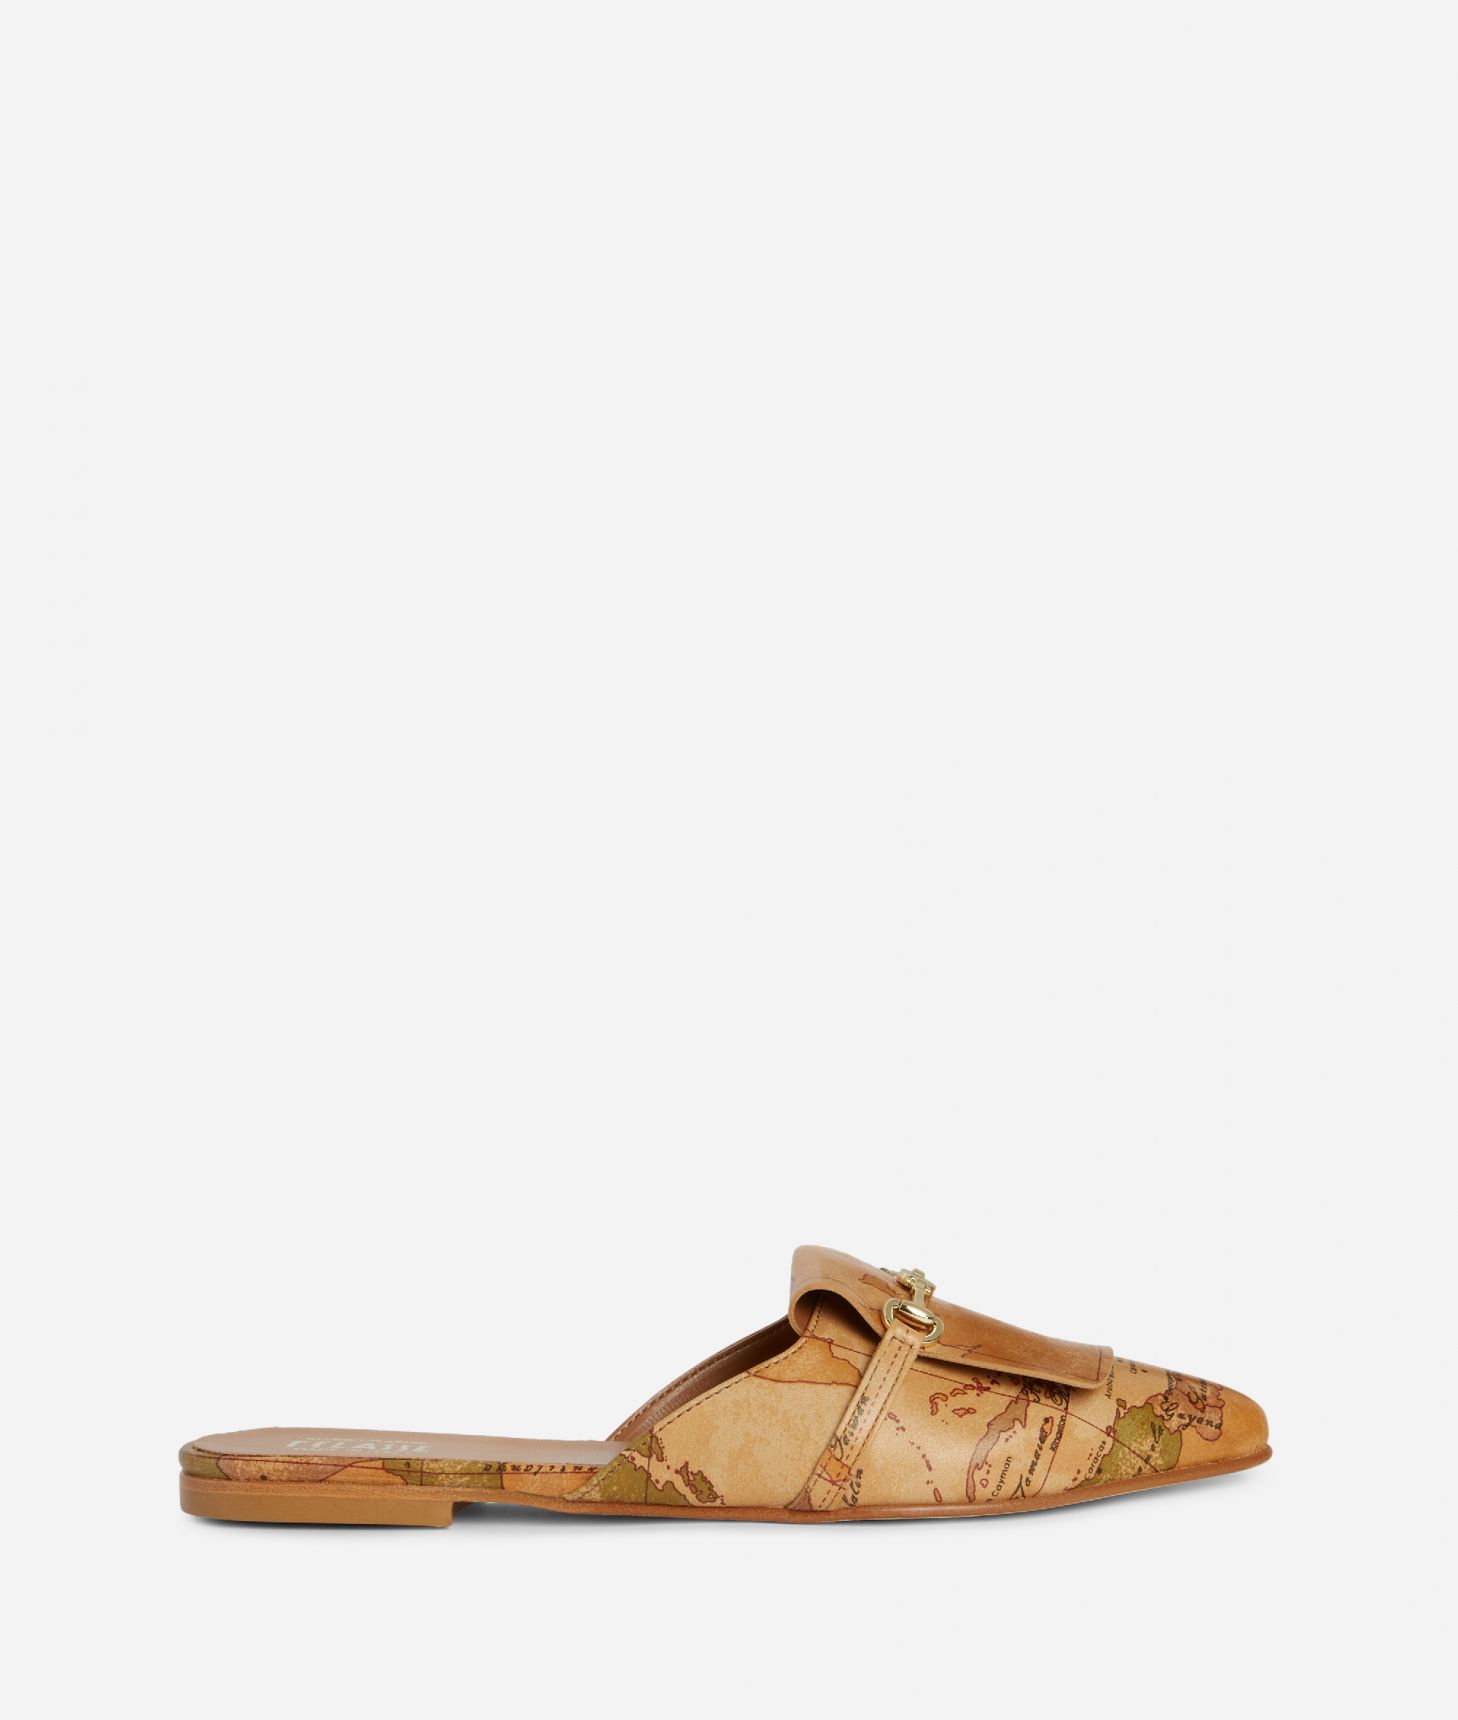 Napa leather slippers in Geo Classic print,front